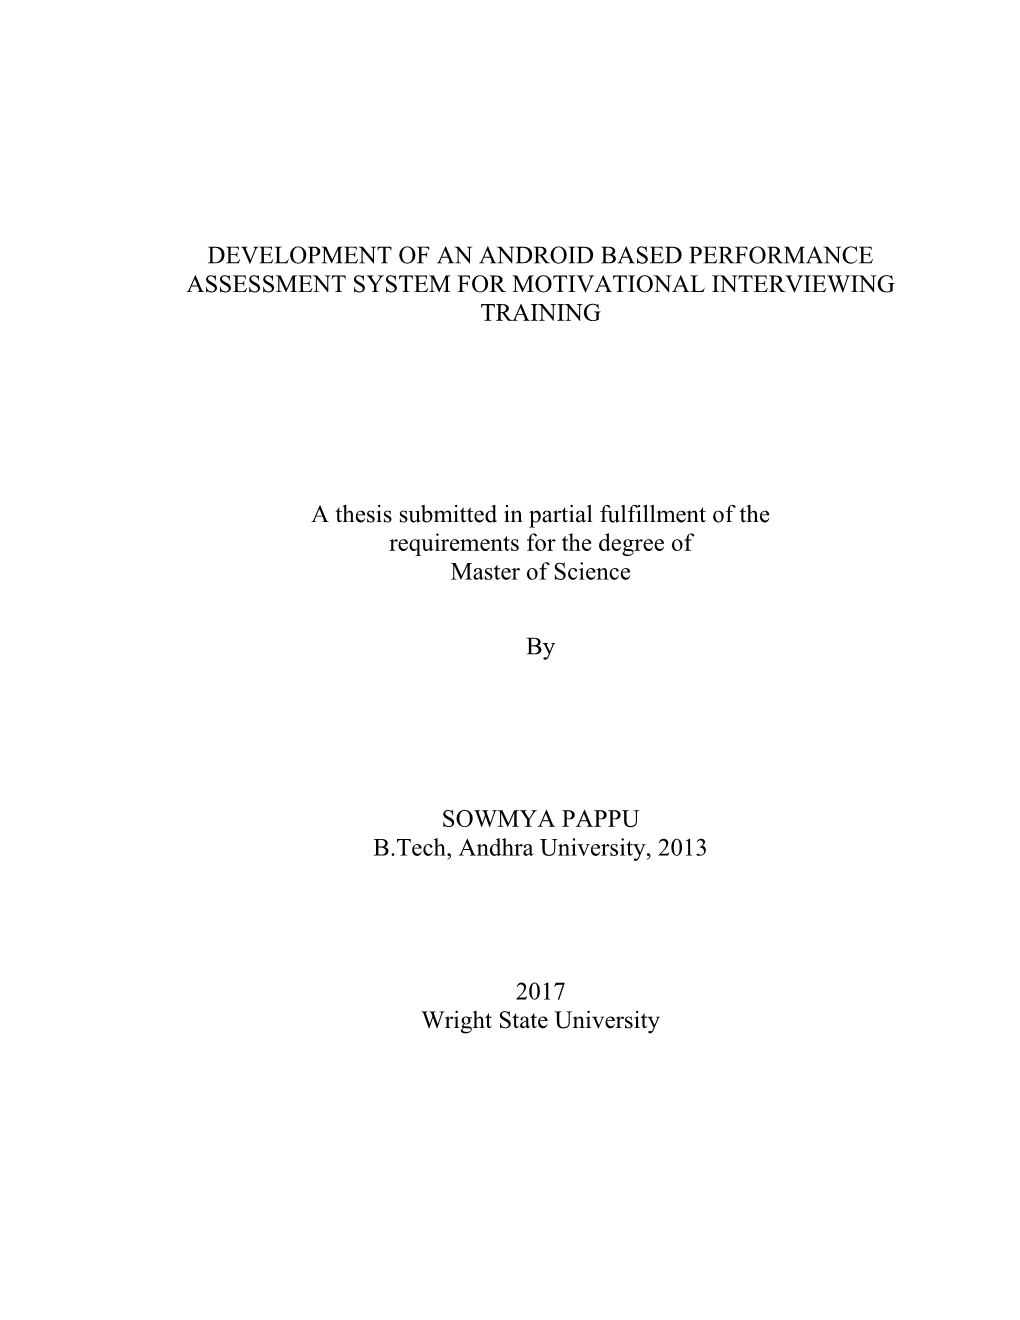 Development of an Android Based Performance Assessment System for Motivational Interviewing Training